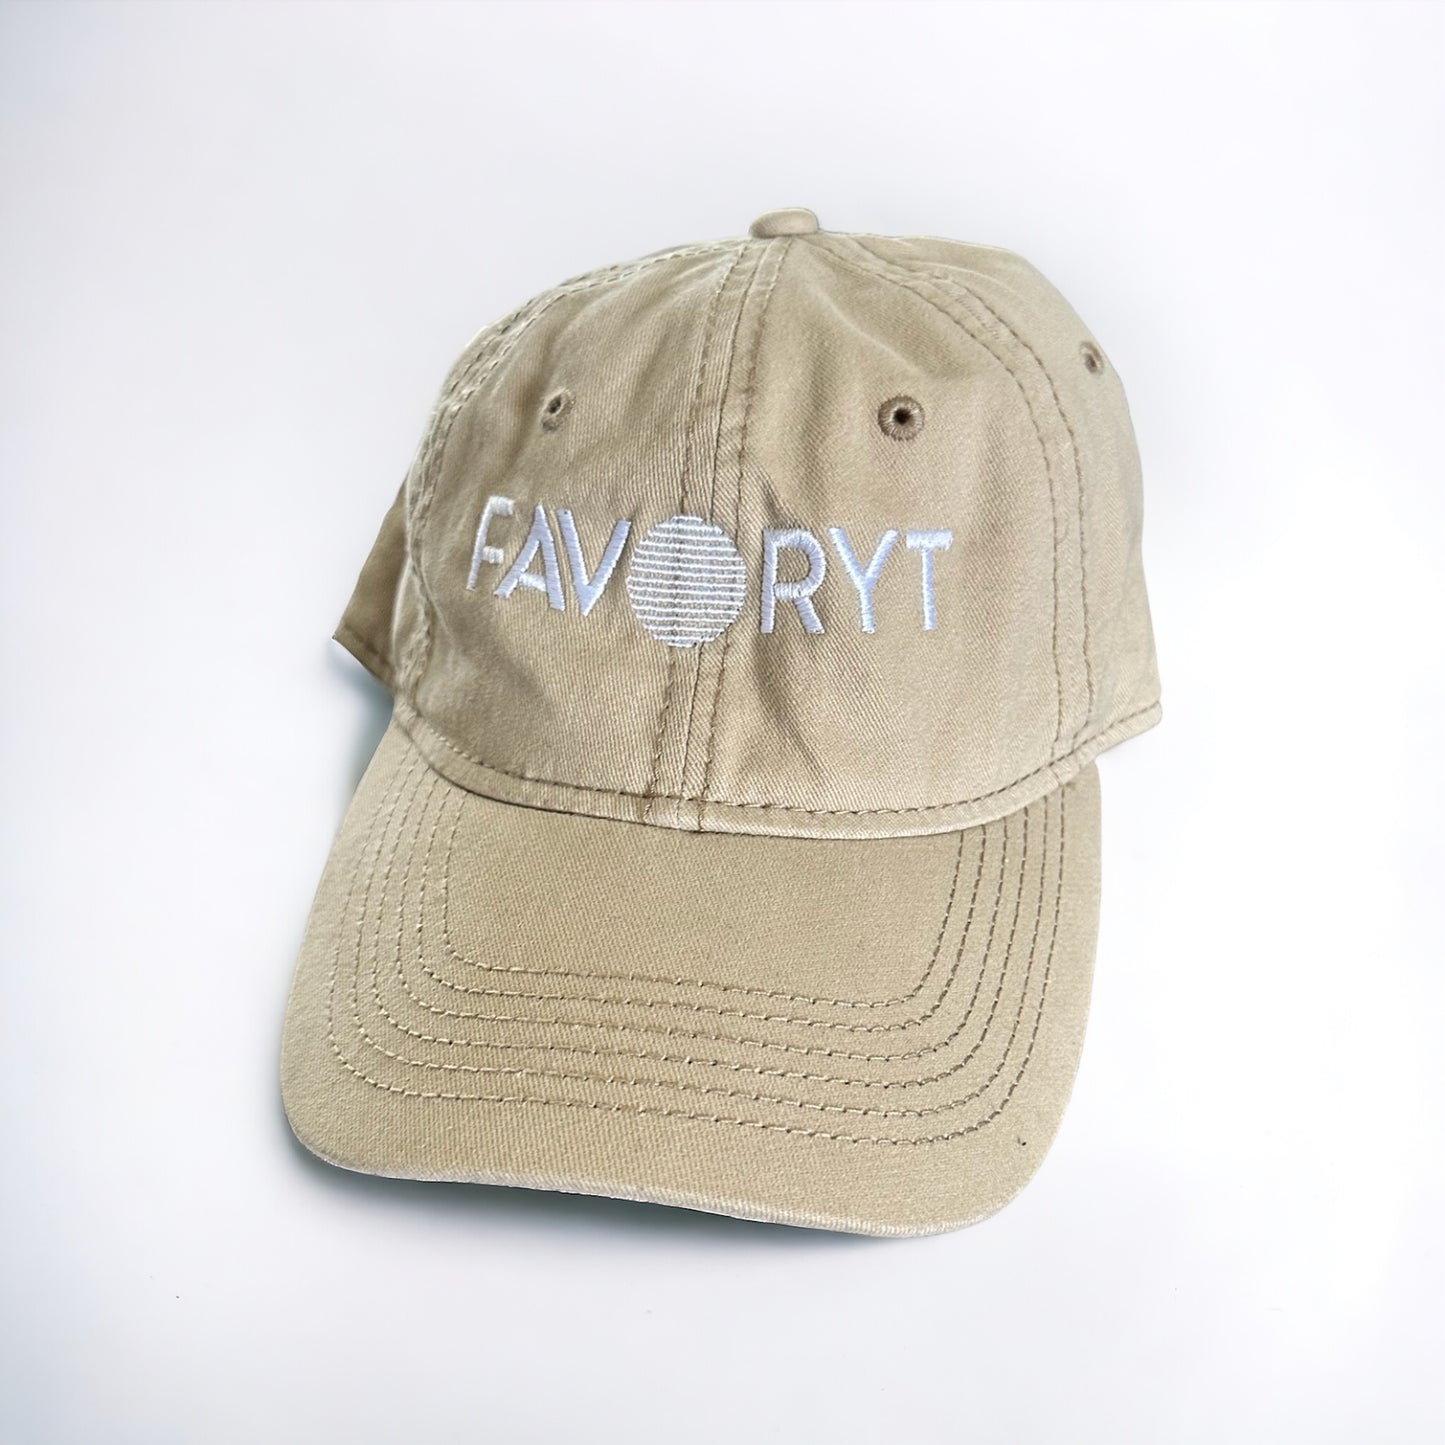 Exclusive FAVORYT Hats (Embroidered)